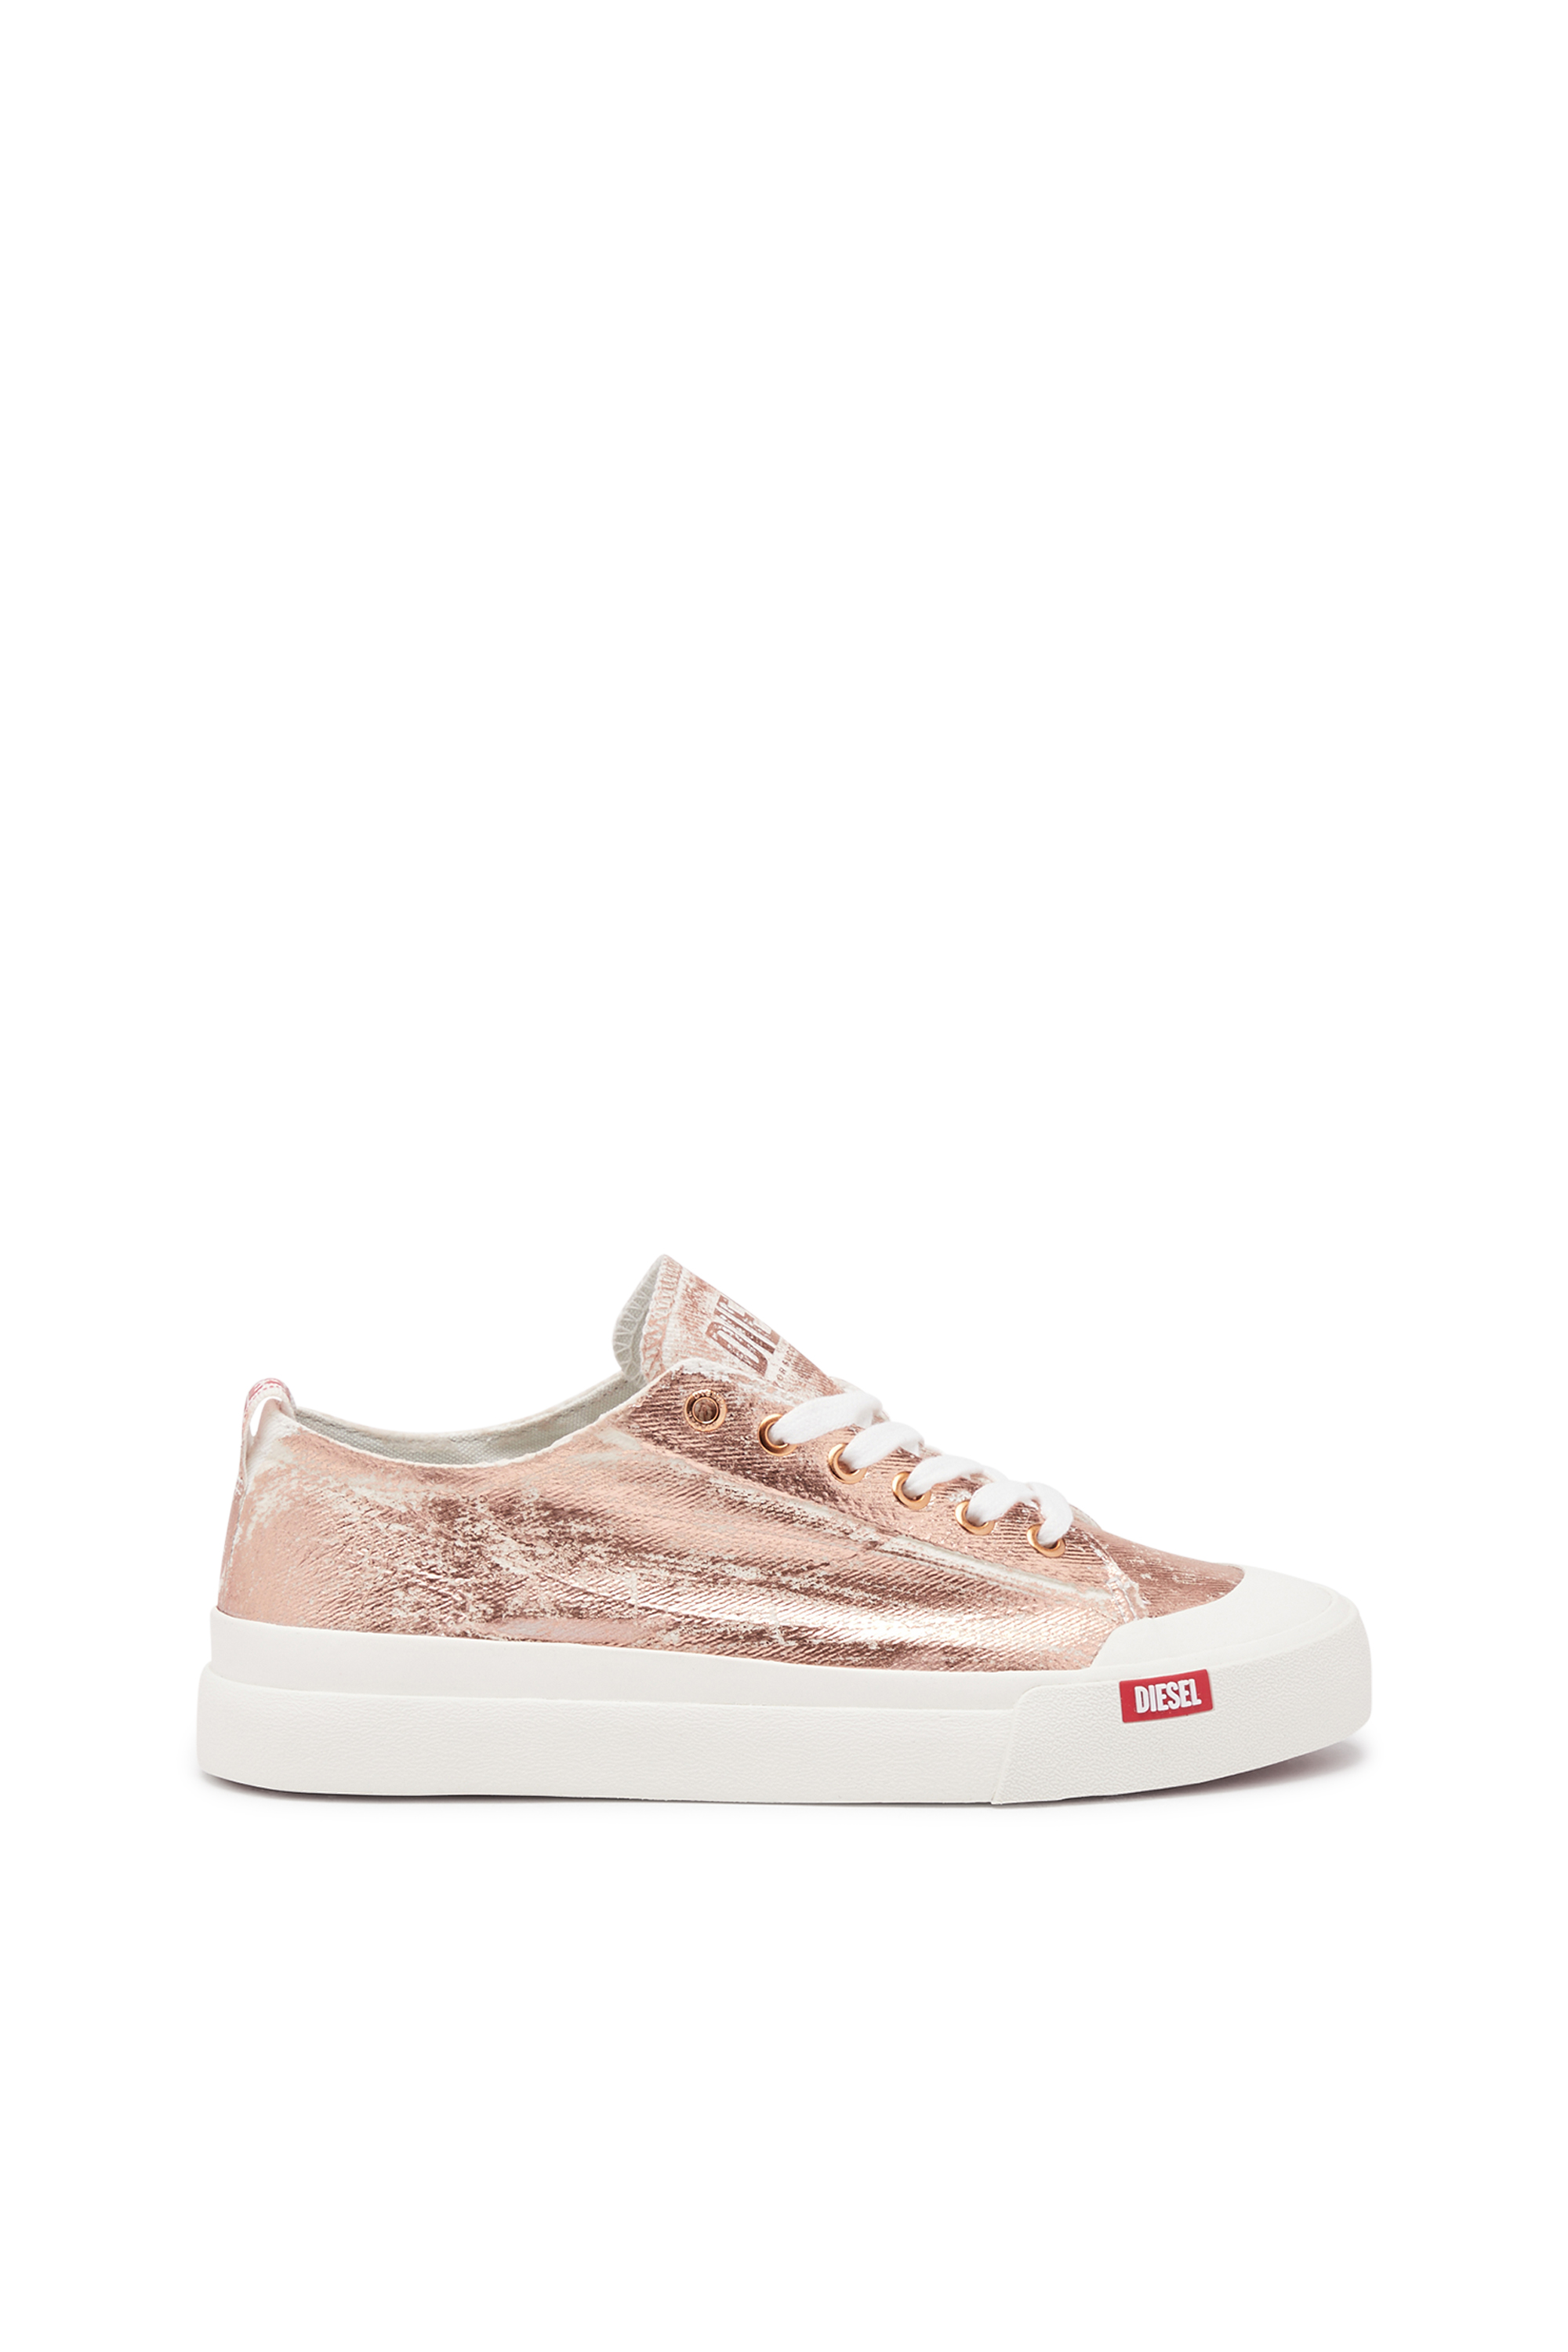 Diesel - S-ATHOS LOW W, Woman S-Athos Low-Distressed sneakers in metallic canvas in Pink - Image 1